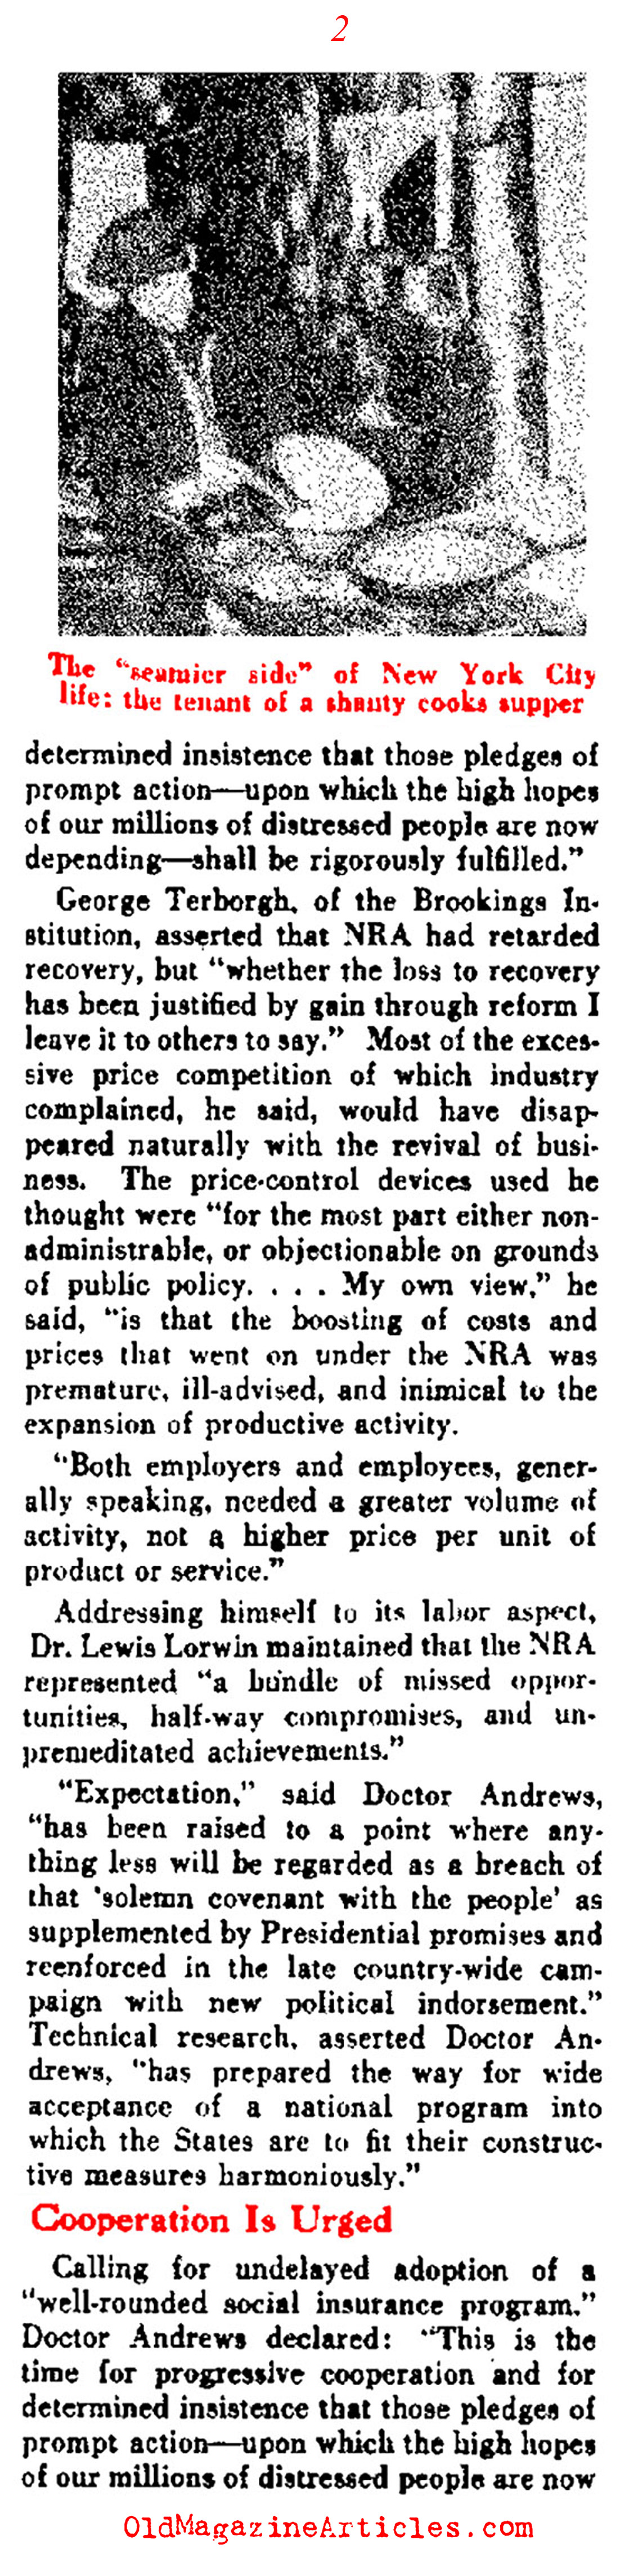 The Forgotten Men and the NRA (Literary Digest, 1935)